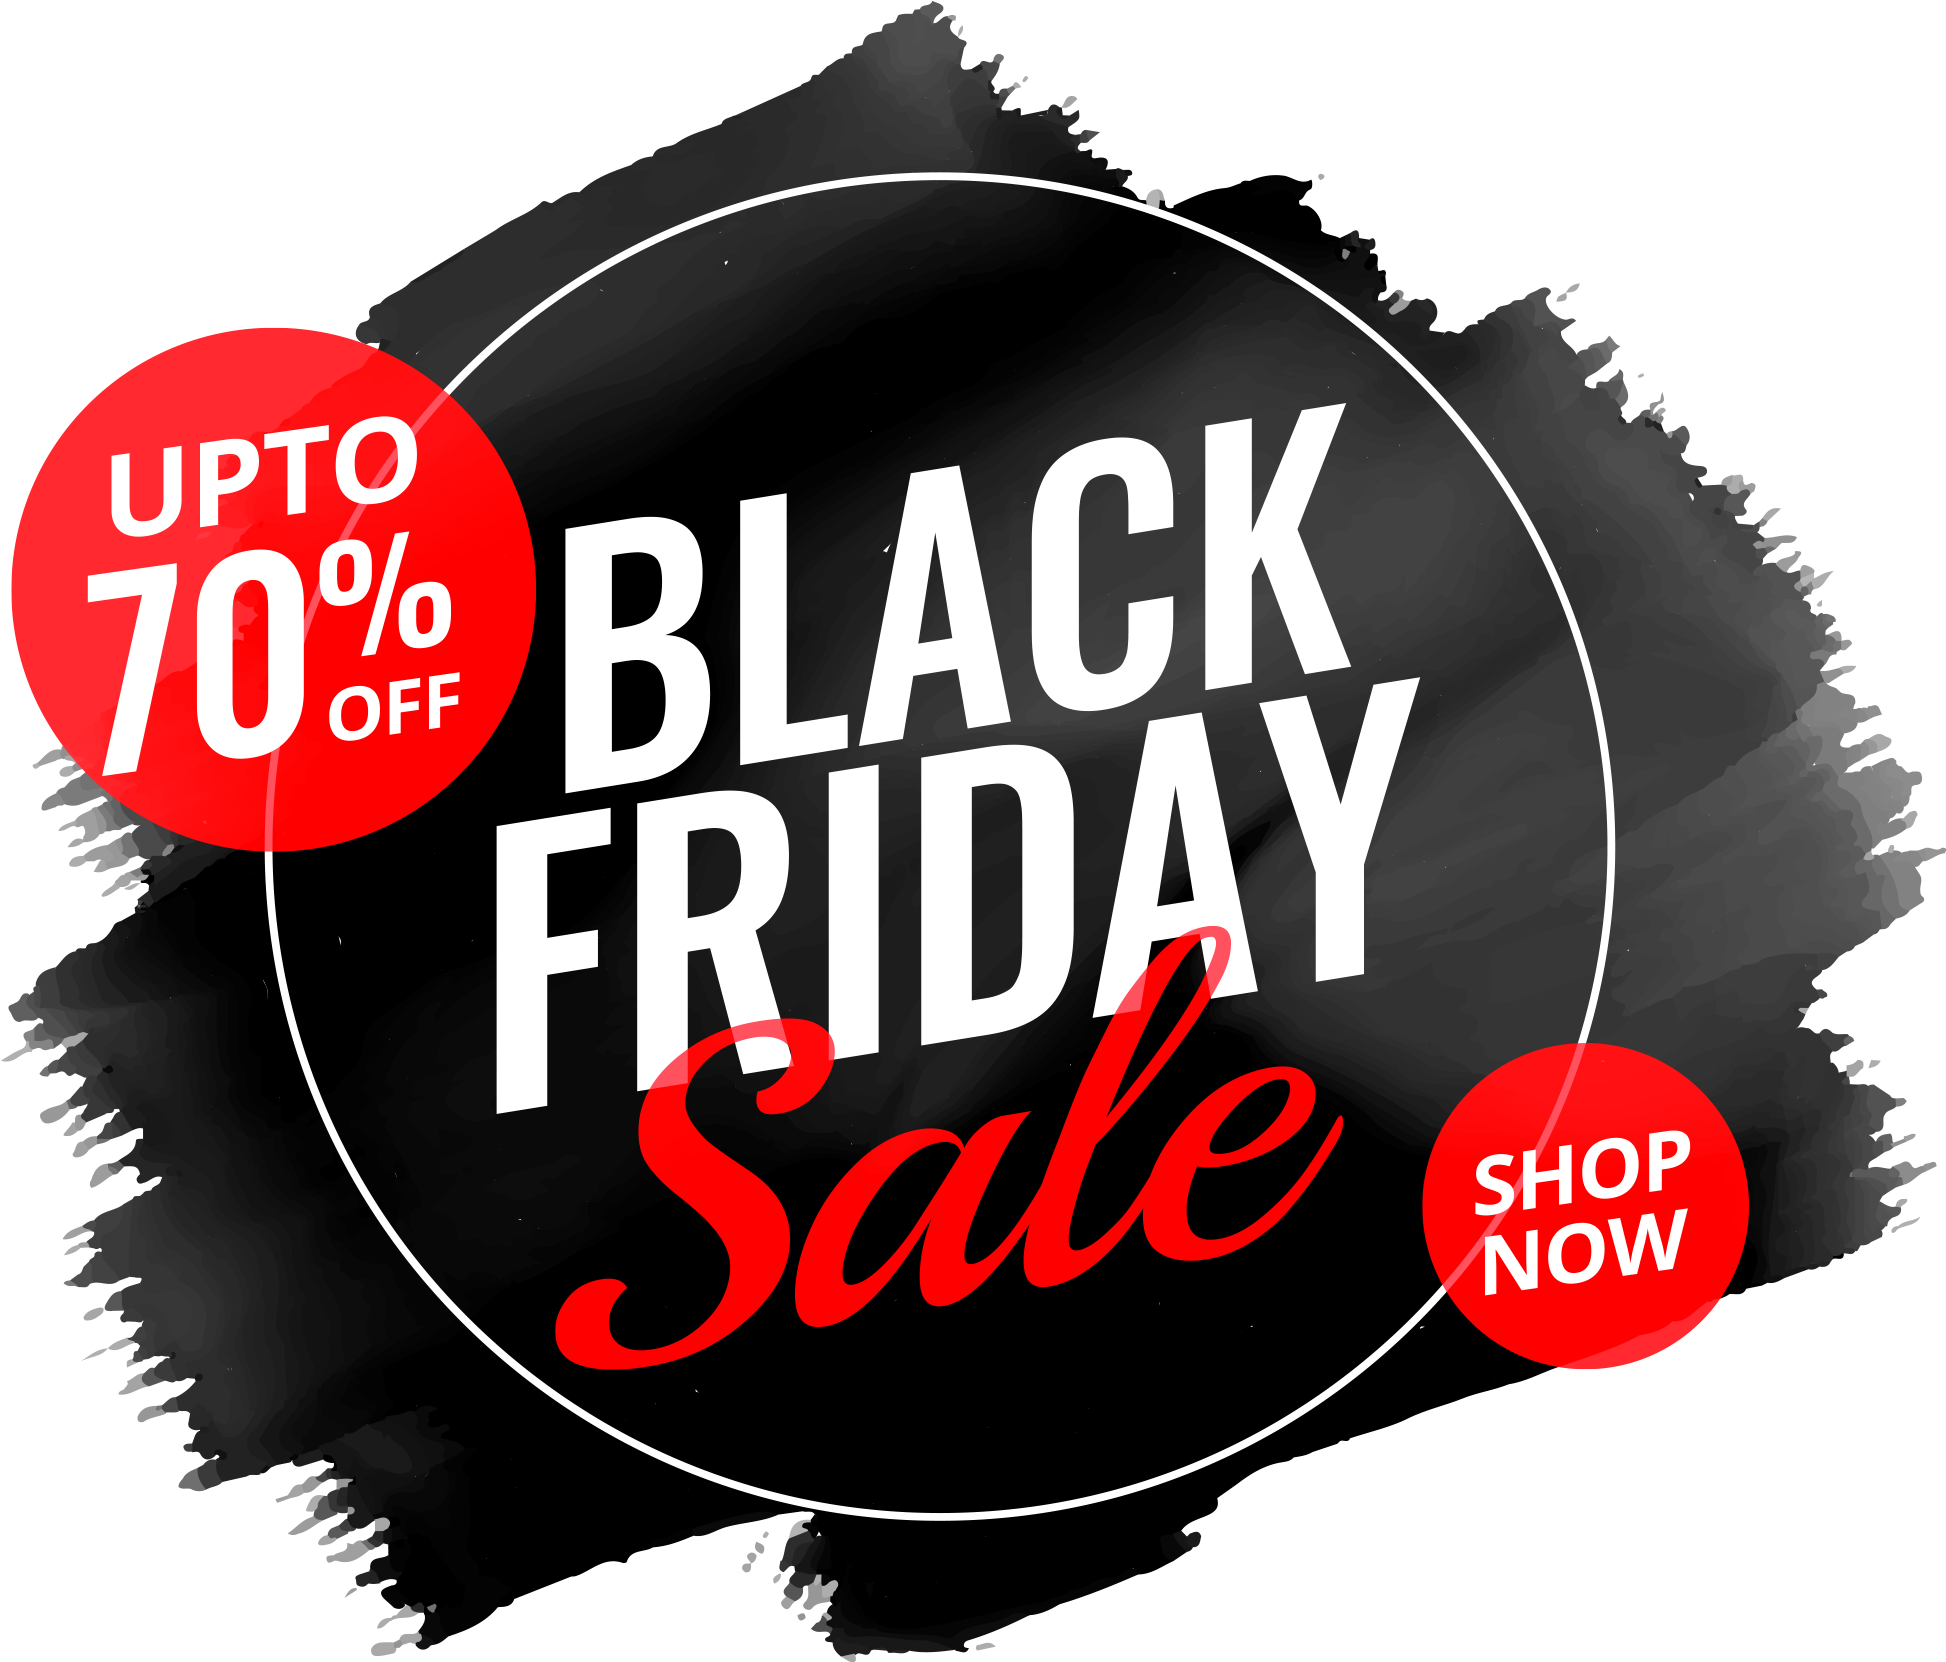 Black Friday Sale Discount Promotion